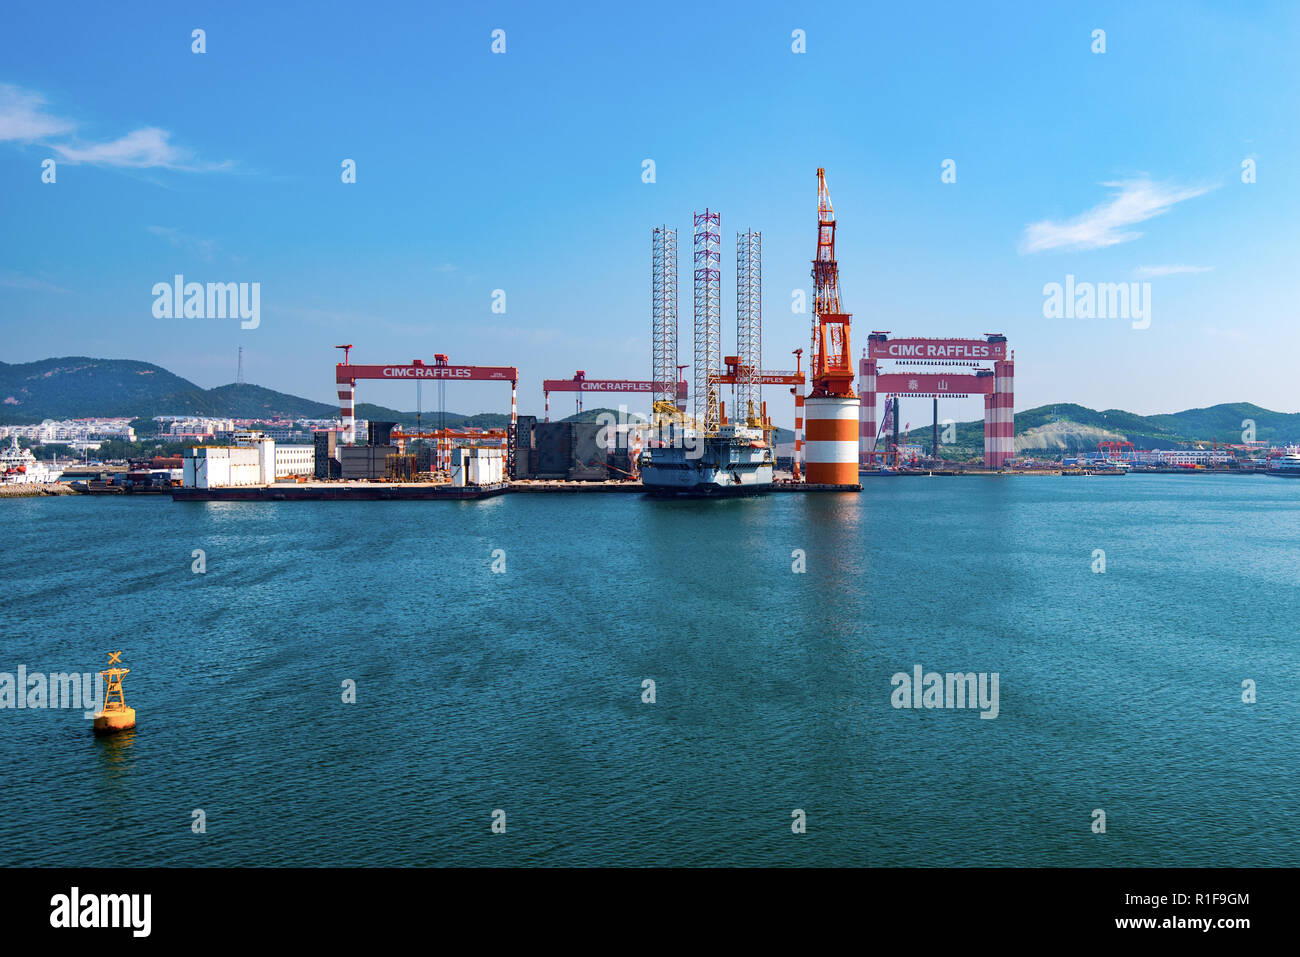 YANTAI, SHANDONG, CHINA - 21JUL2018: The CIMC Raffles Shipyard. To the right is Taisun, the largest gantry crane in the world with a lifting capacity  Stock Photo